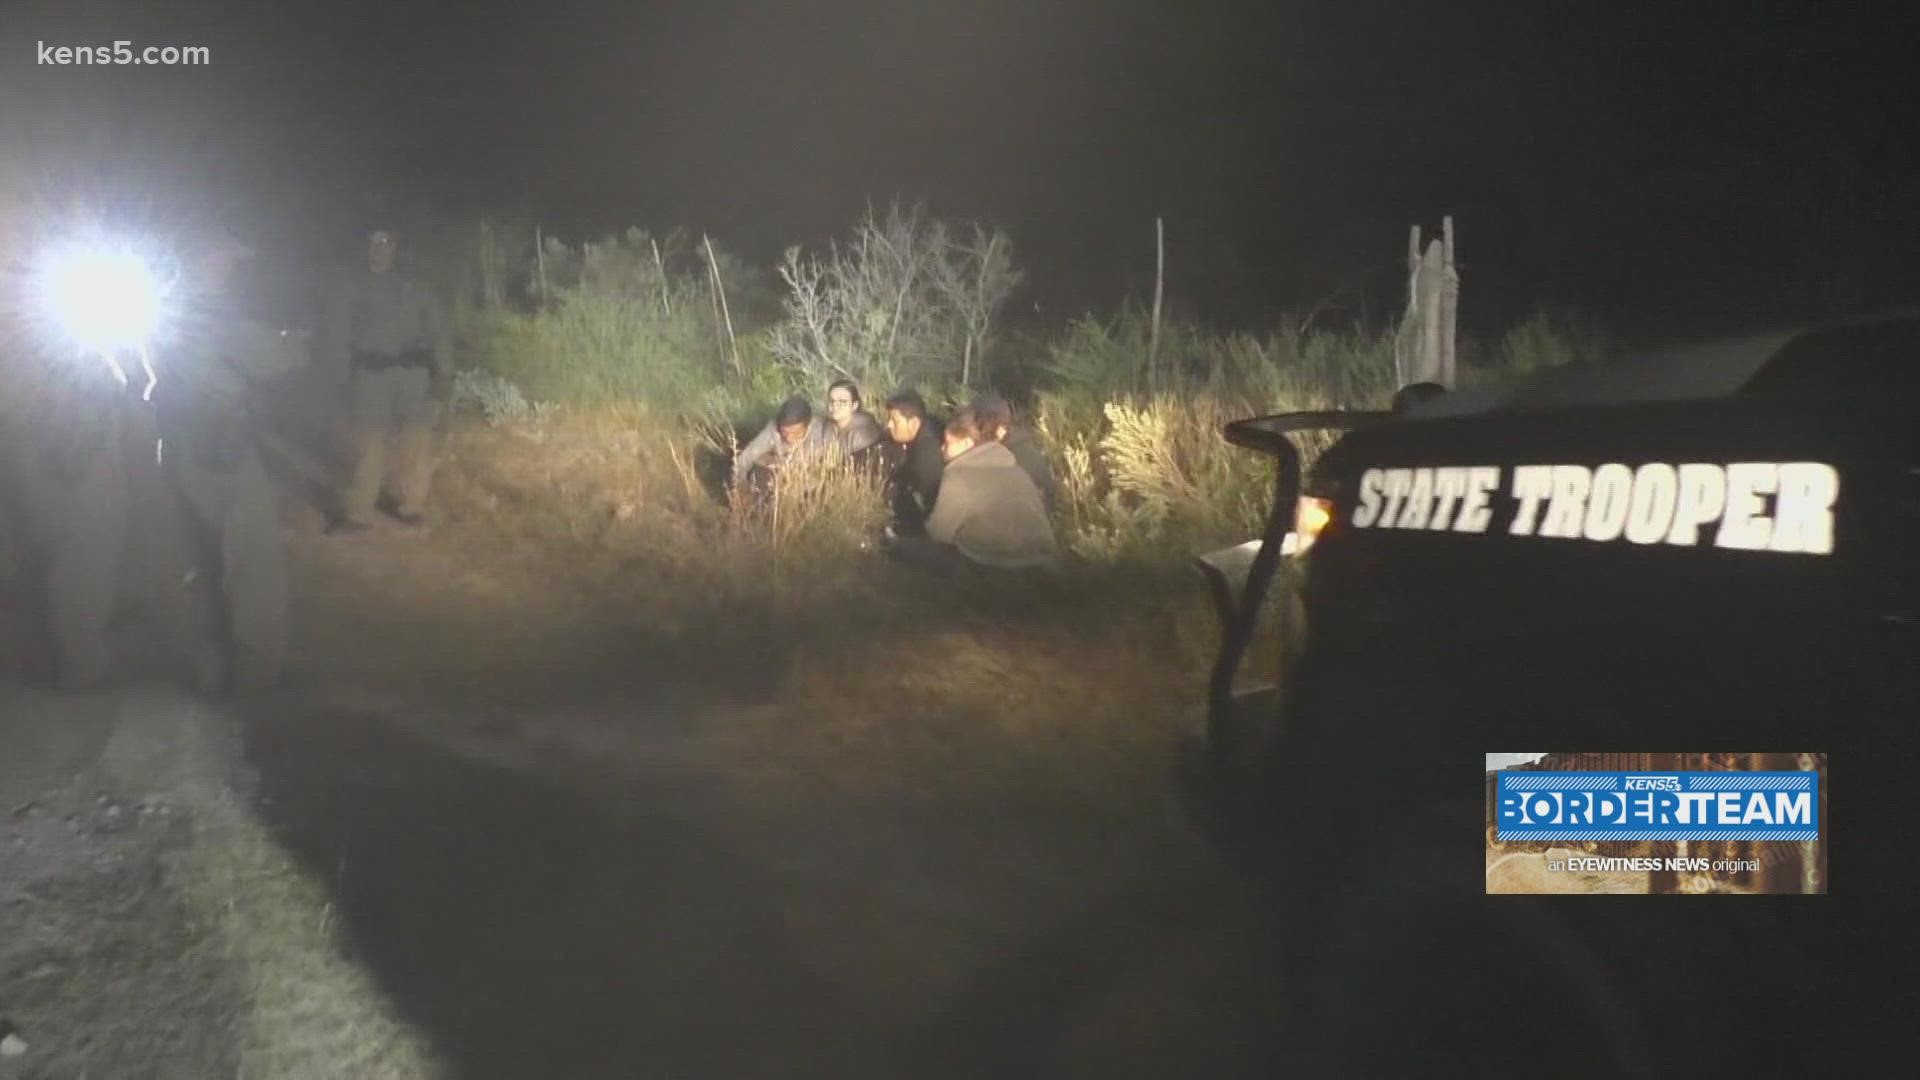 DPS said over 1,800 migrants have been arrested in the area since July.